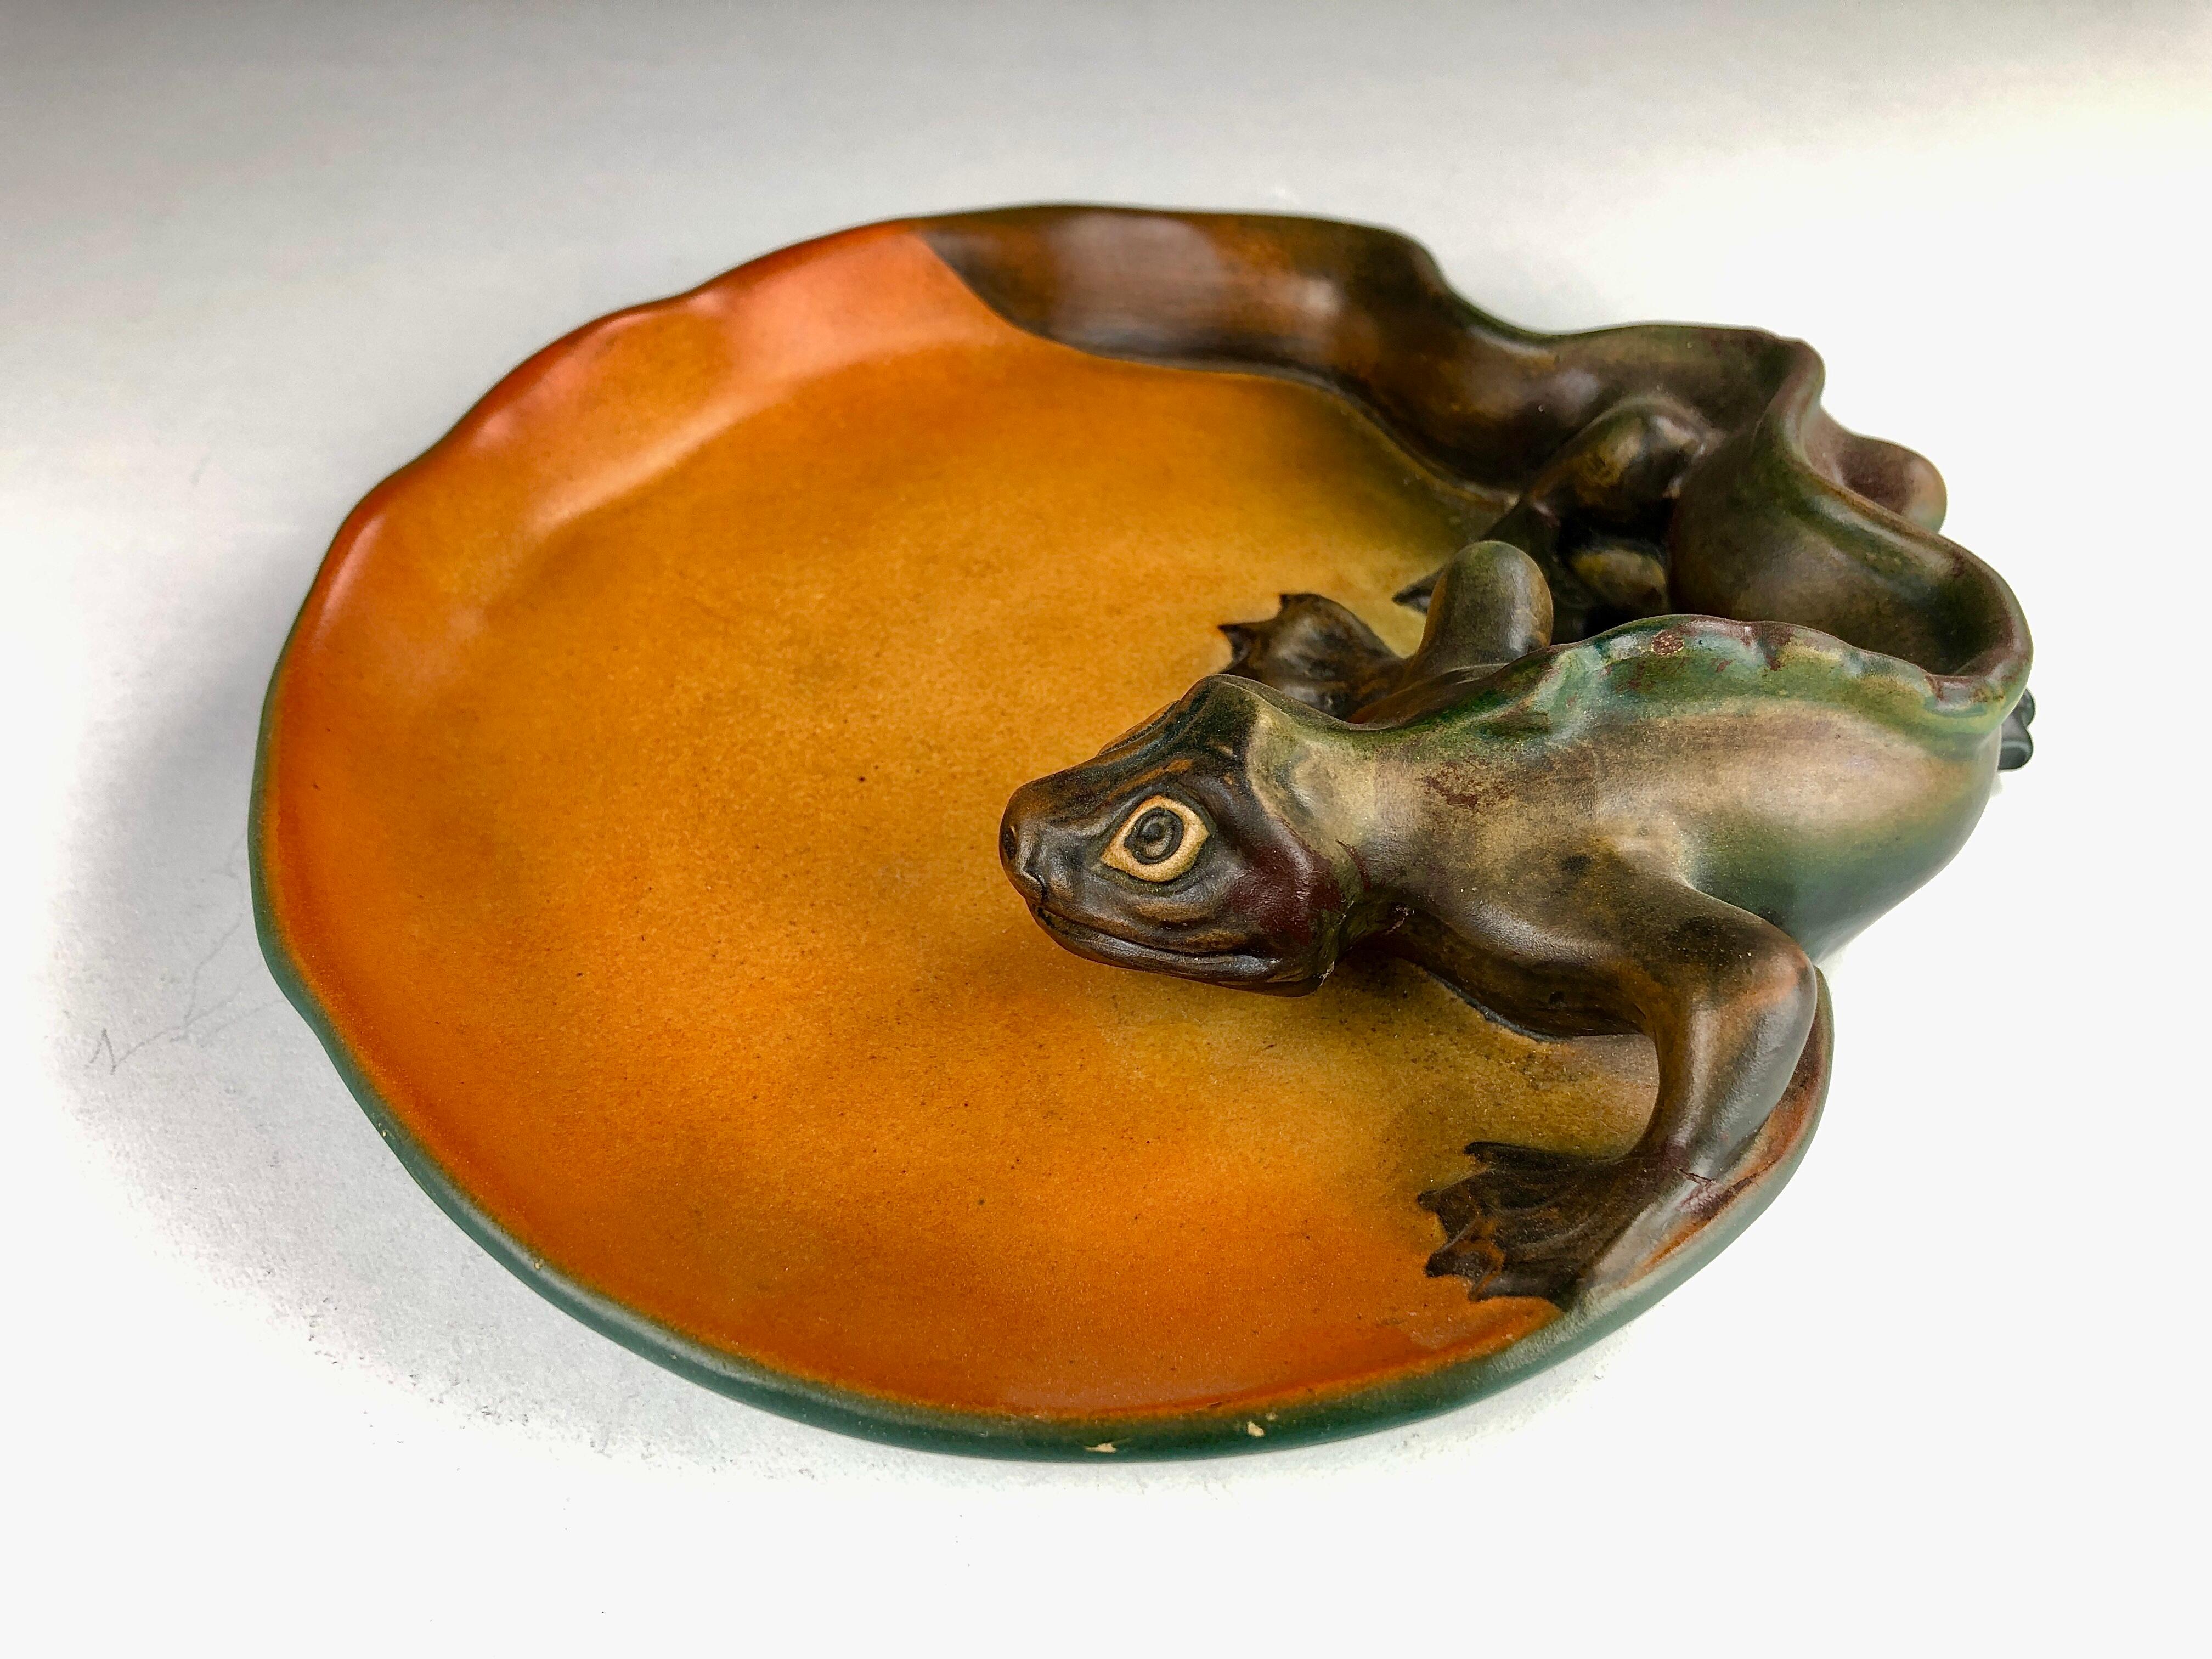 Danish Art Nouveau Lizard ash tray / bowl by Axel Jensen for Ibsens Enke in 1905.

The art nuveau ash tray / bowl feature a well made lively lizard with a tail that surround the middle of the ash tray / bowl is in excellent condition.

Ibsens